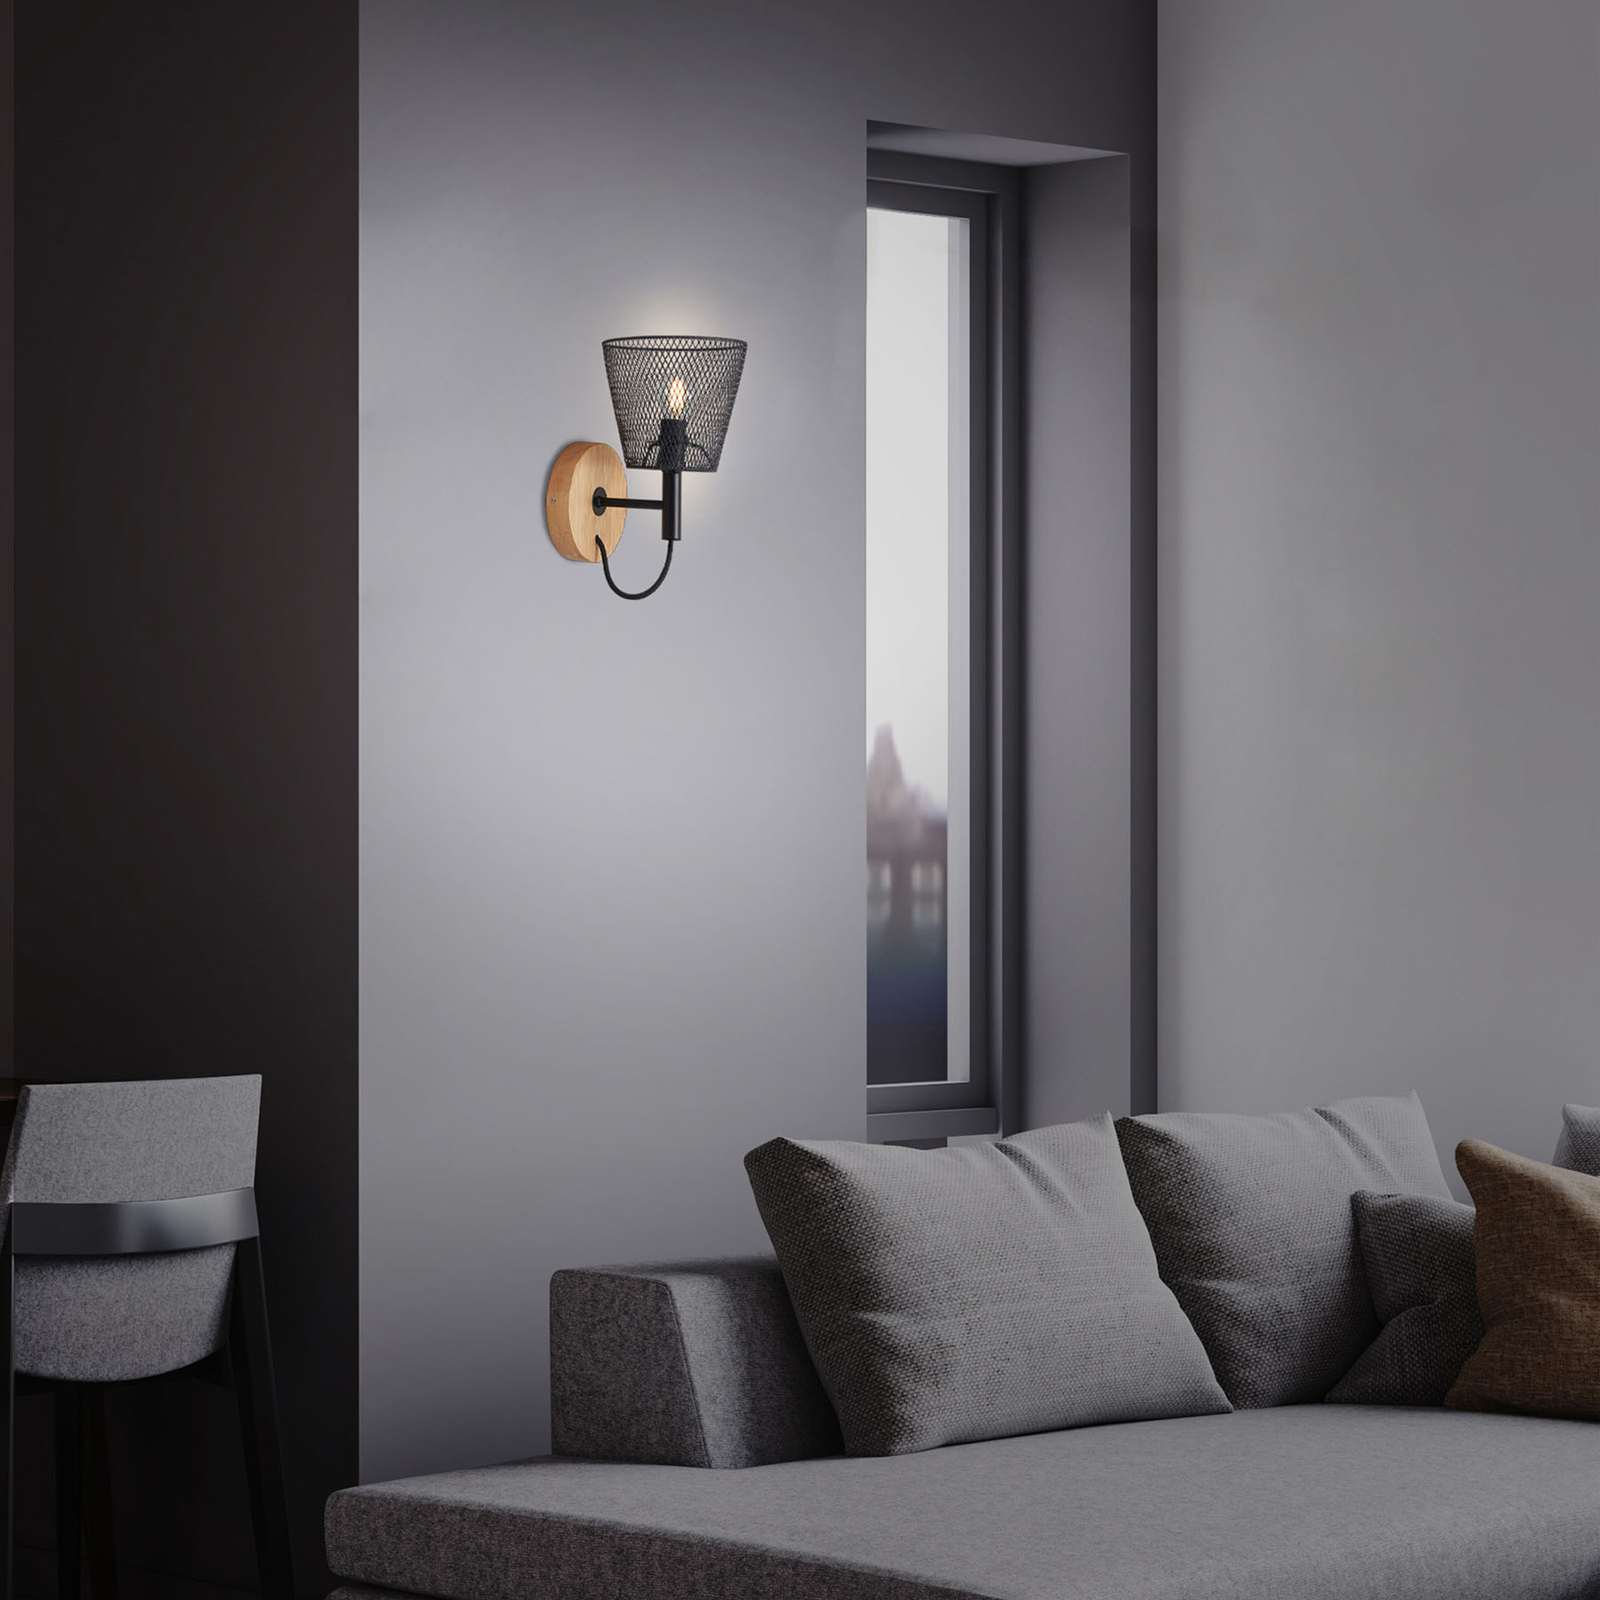 Wood & Style 2077 Wall lamp with expanded metal shade